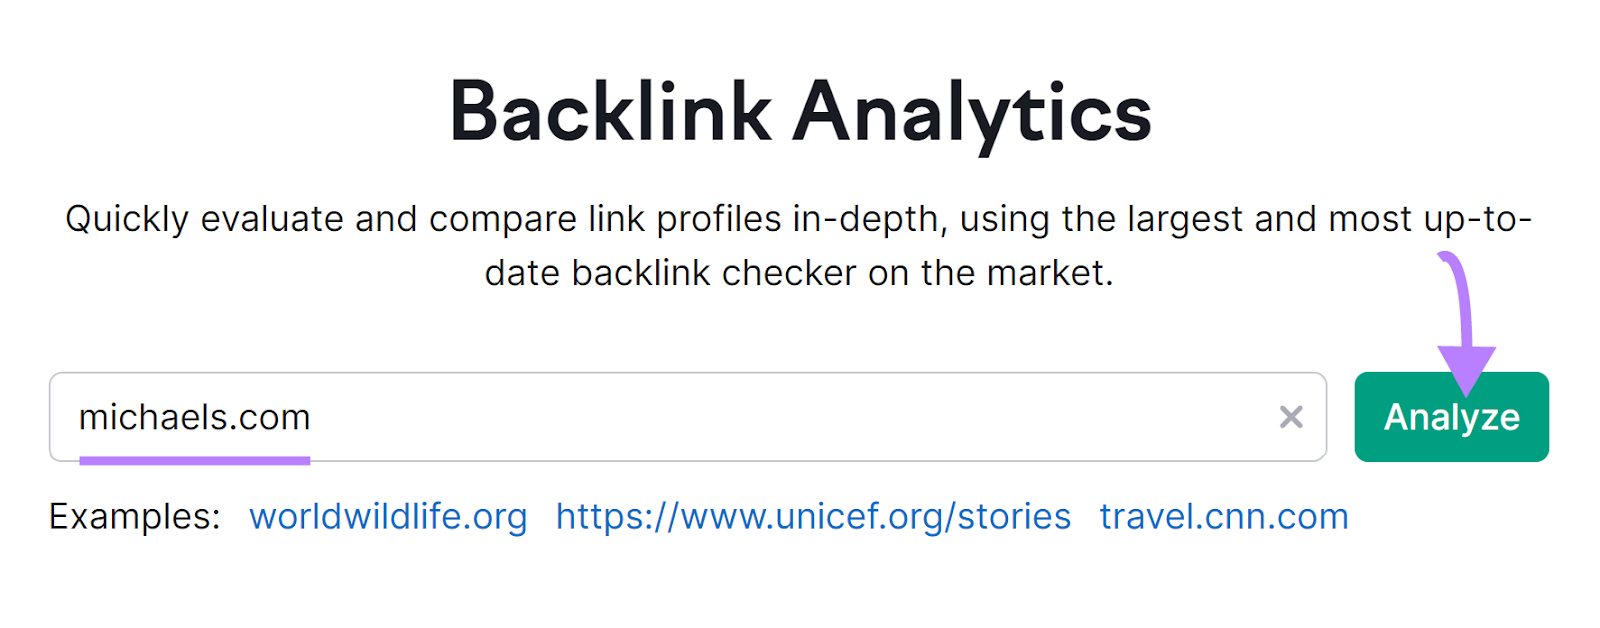 "michaels.com" entered into the Backlink Analytics search bar